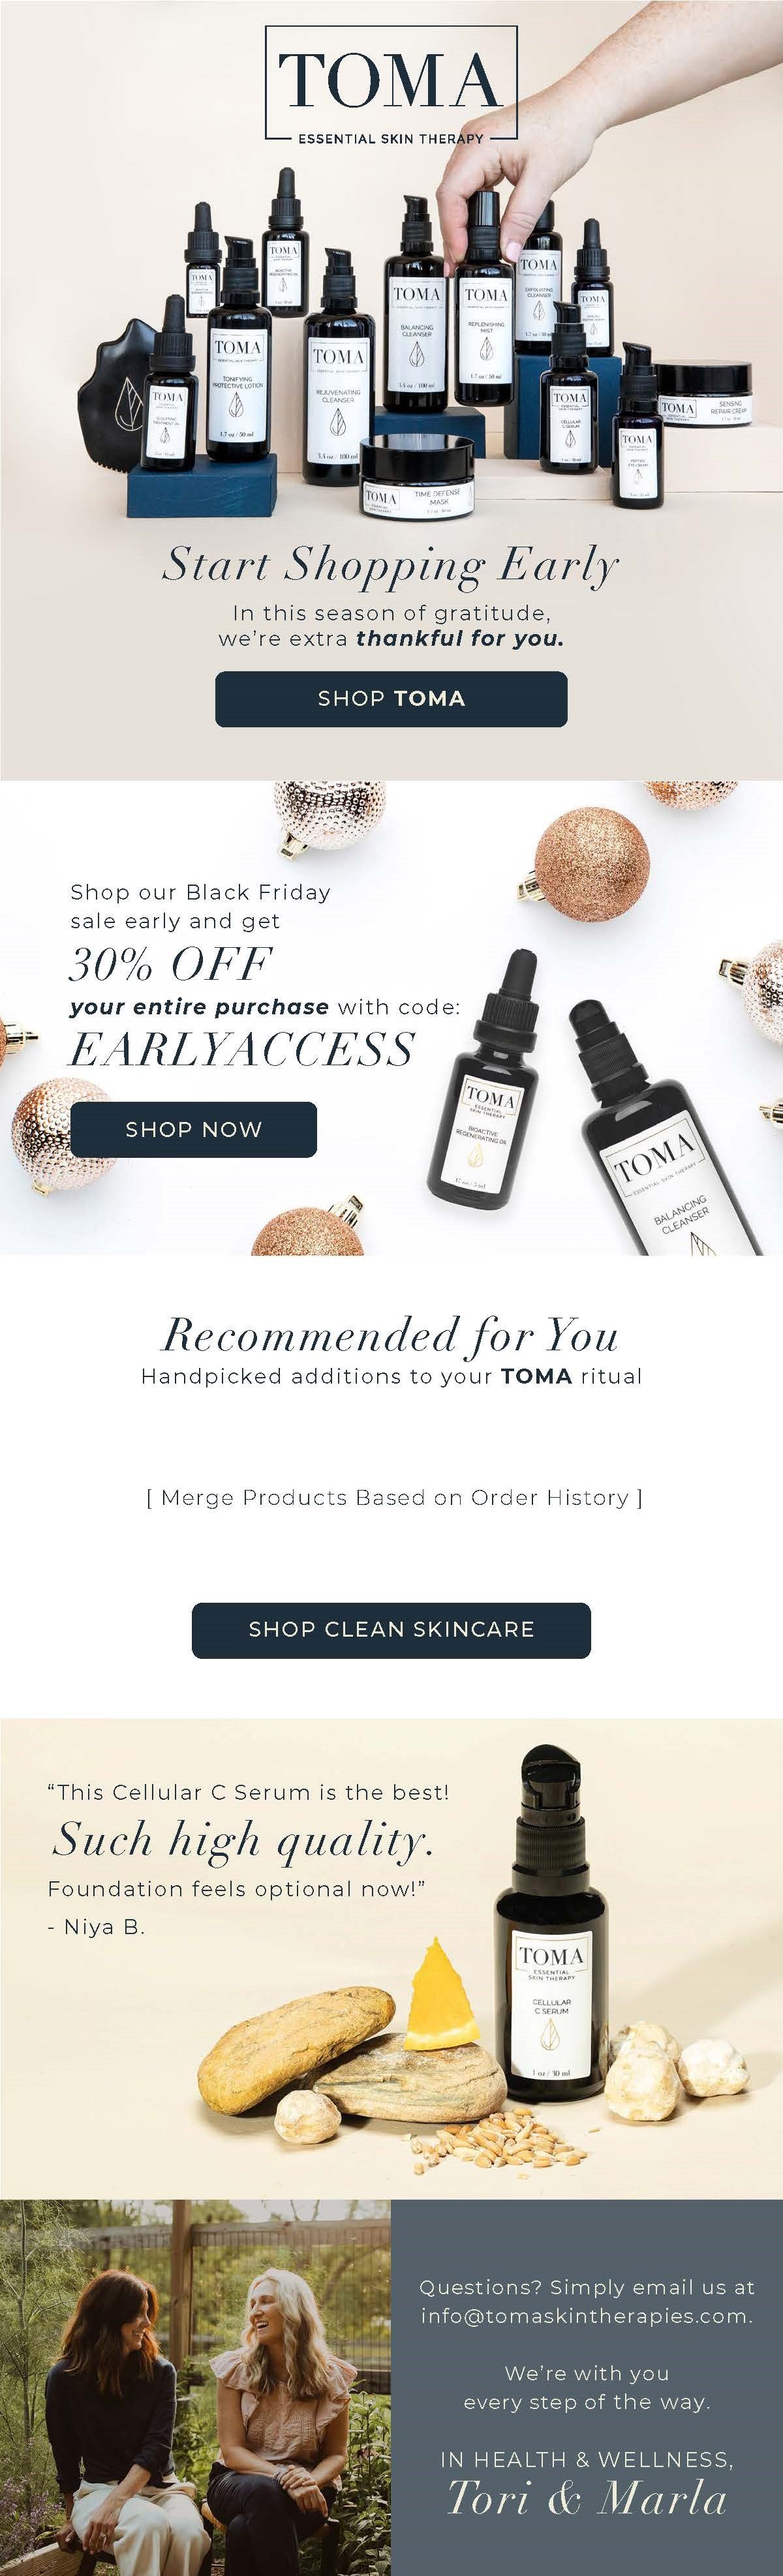 Toma Skin Therapies Email - Holiday 3 Early Access VIPs.jpg